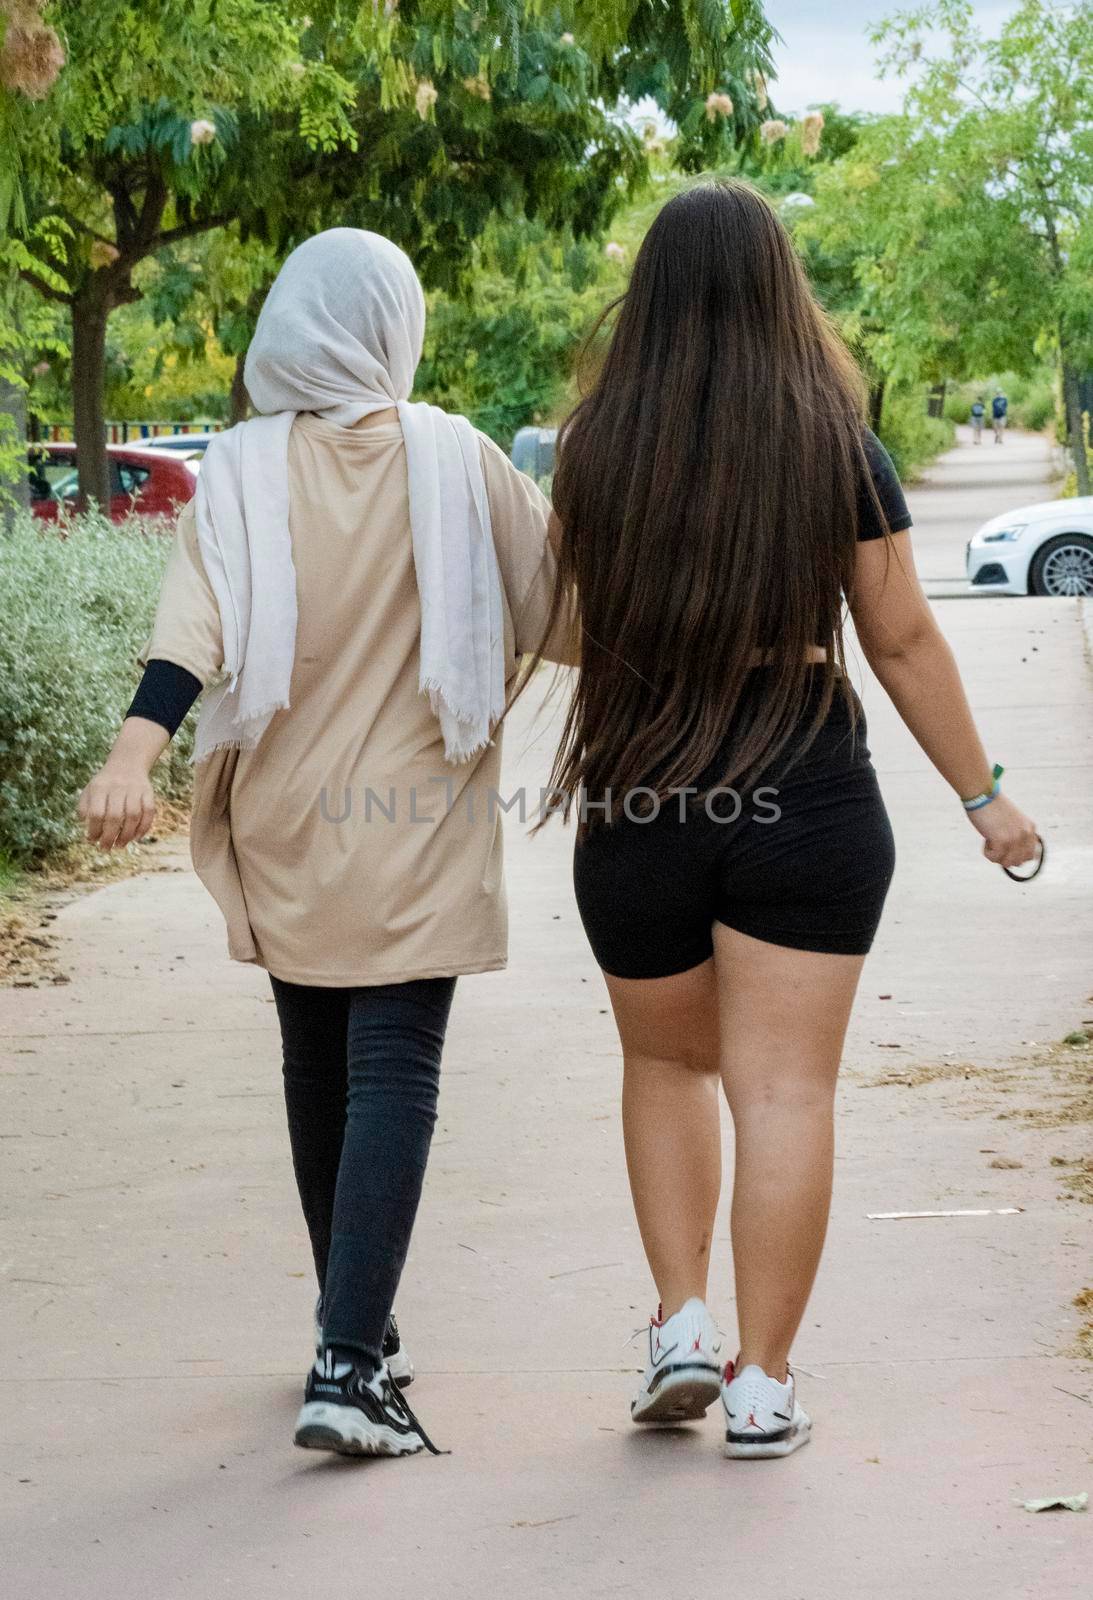 Arabic and european teen girls walking and enjoying time together in a park. Multicultural and multiethnic concept.